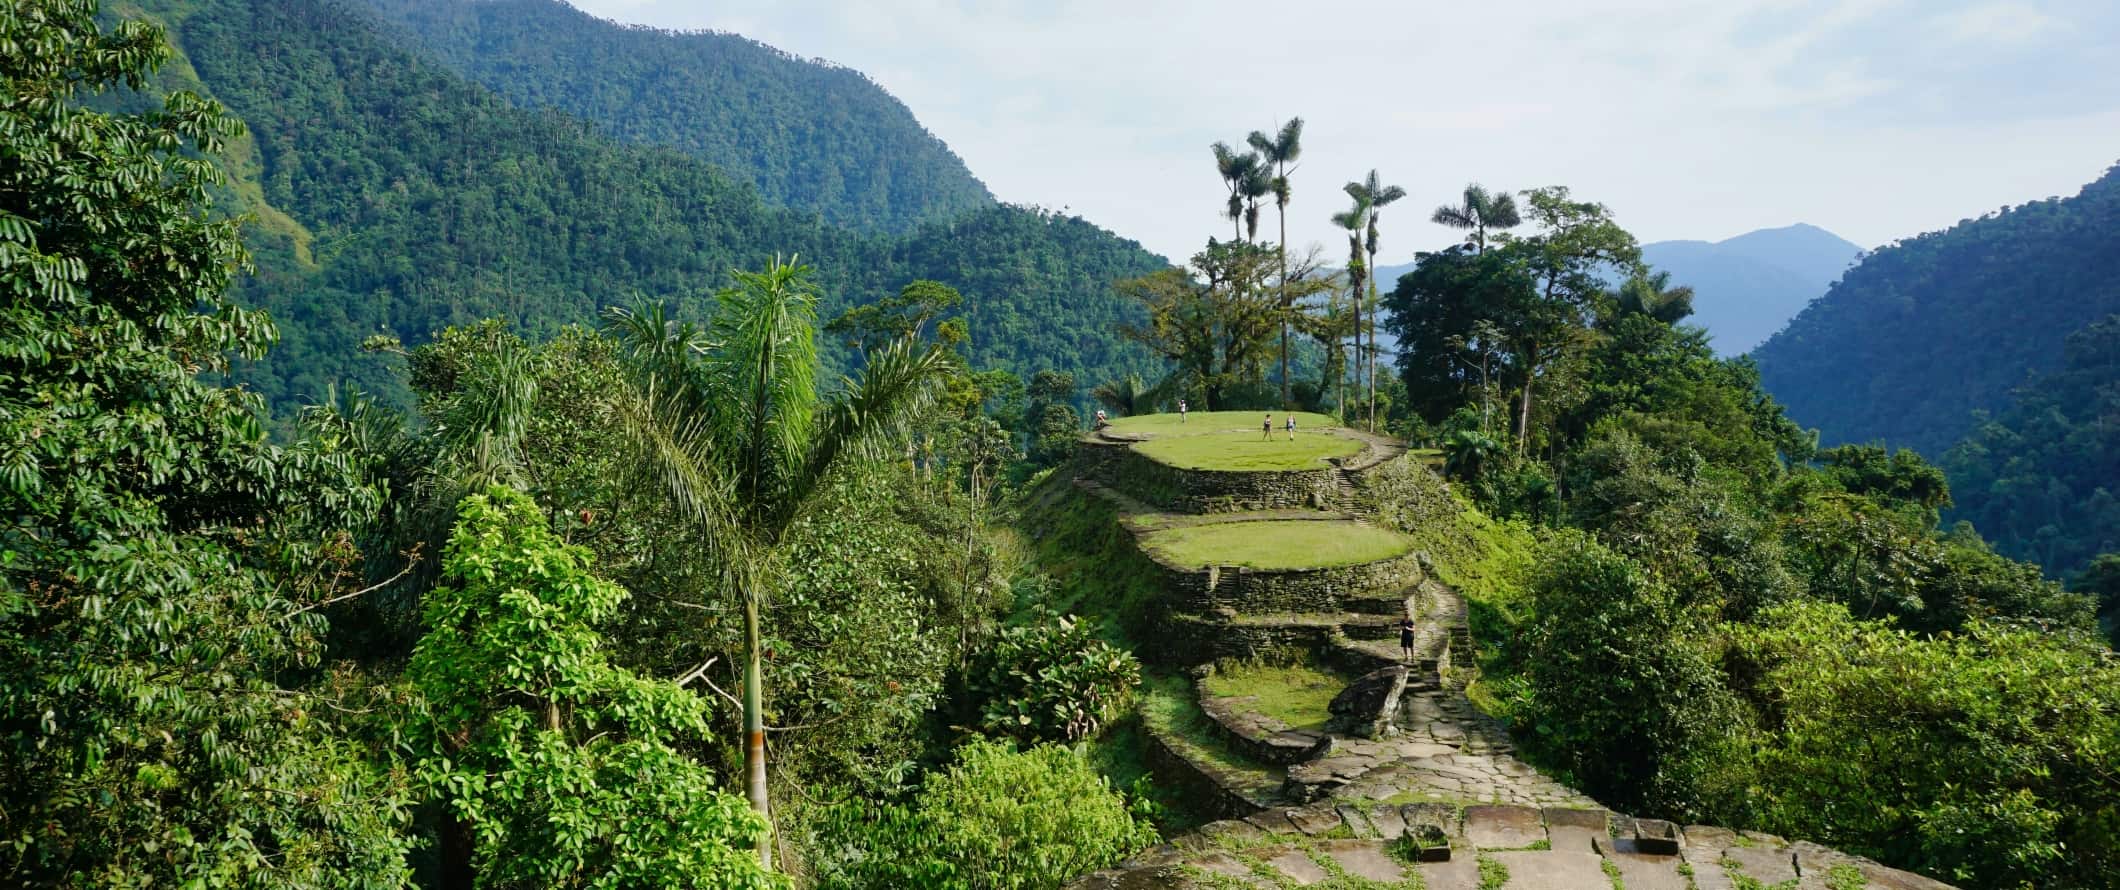 People walking around on the ruined Ciudad Perdida in the rainforest of Colombia